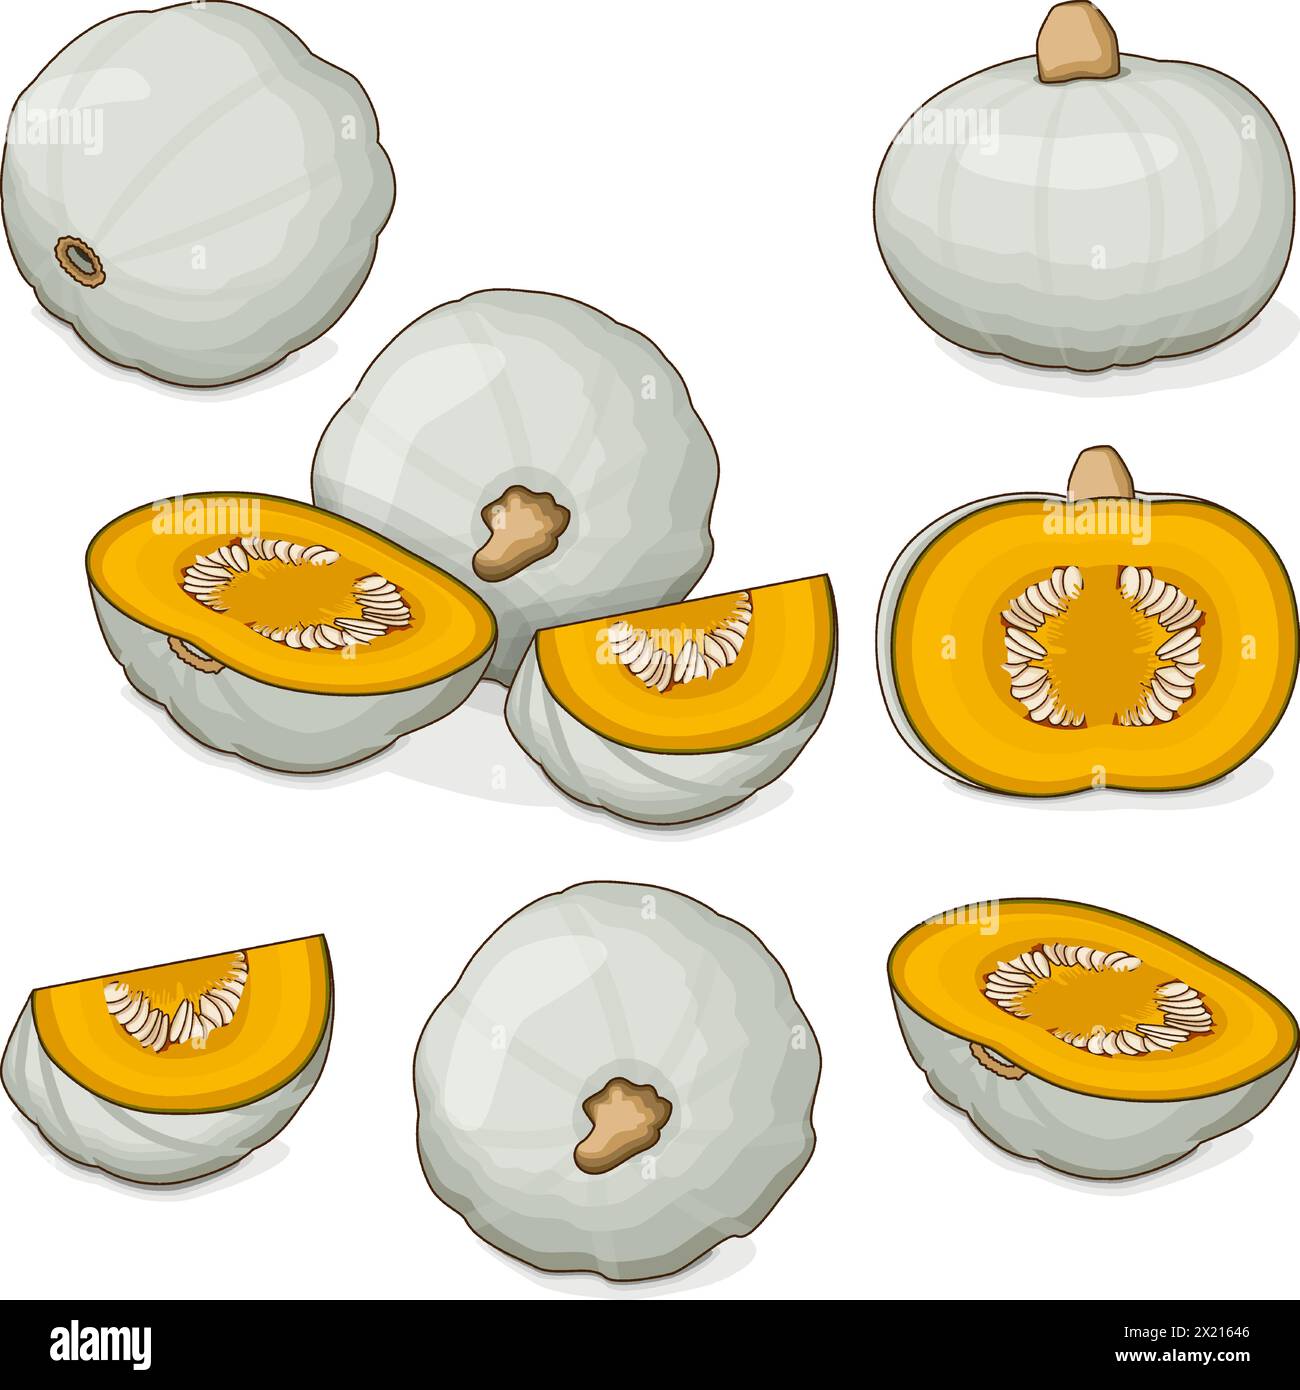 Set of Crown Prince Squash. Winter squash. Cucurbita maxima. Fruits and vegetables. Clipart. Isolated vector illustration. Stock Vector